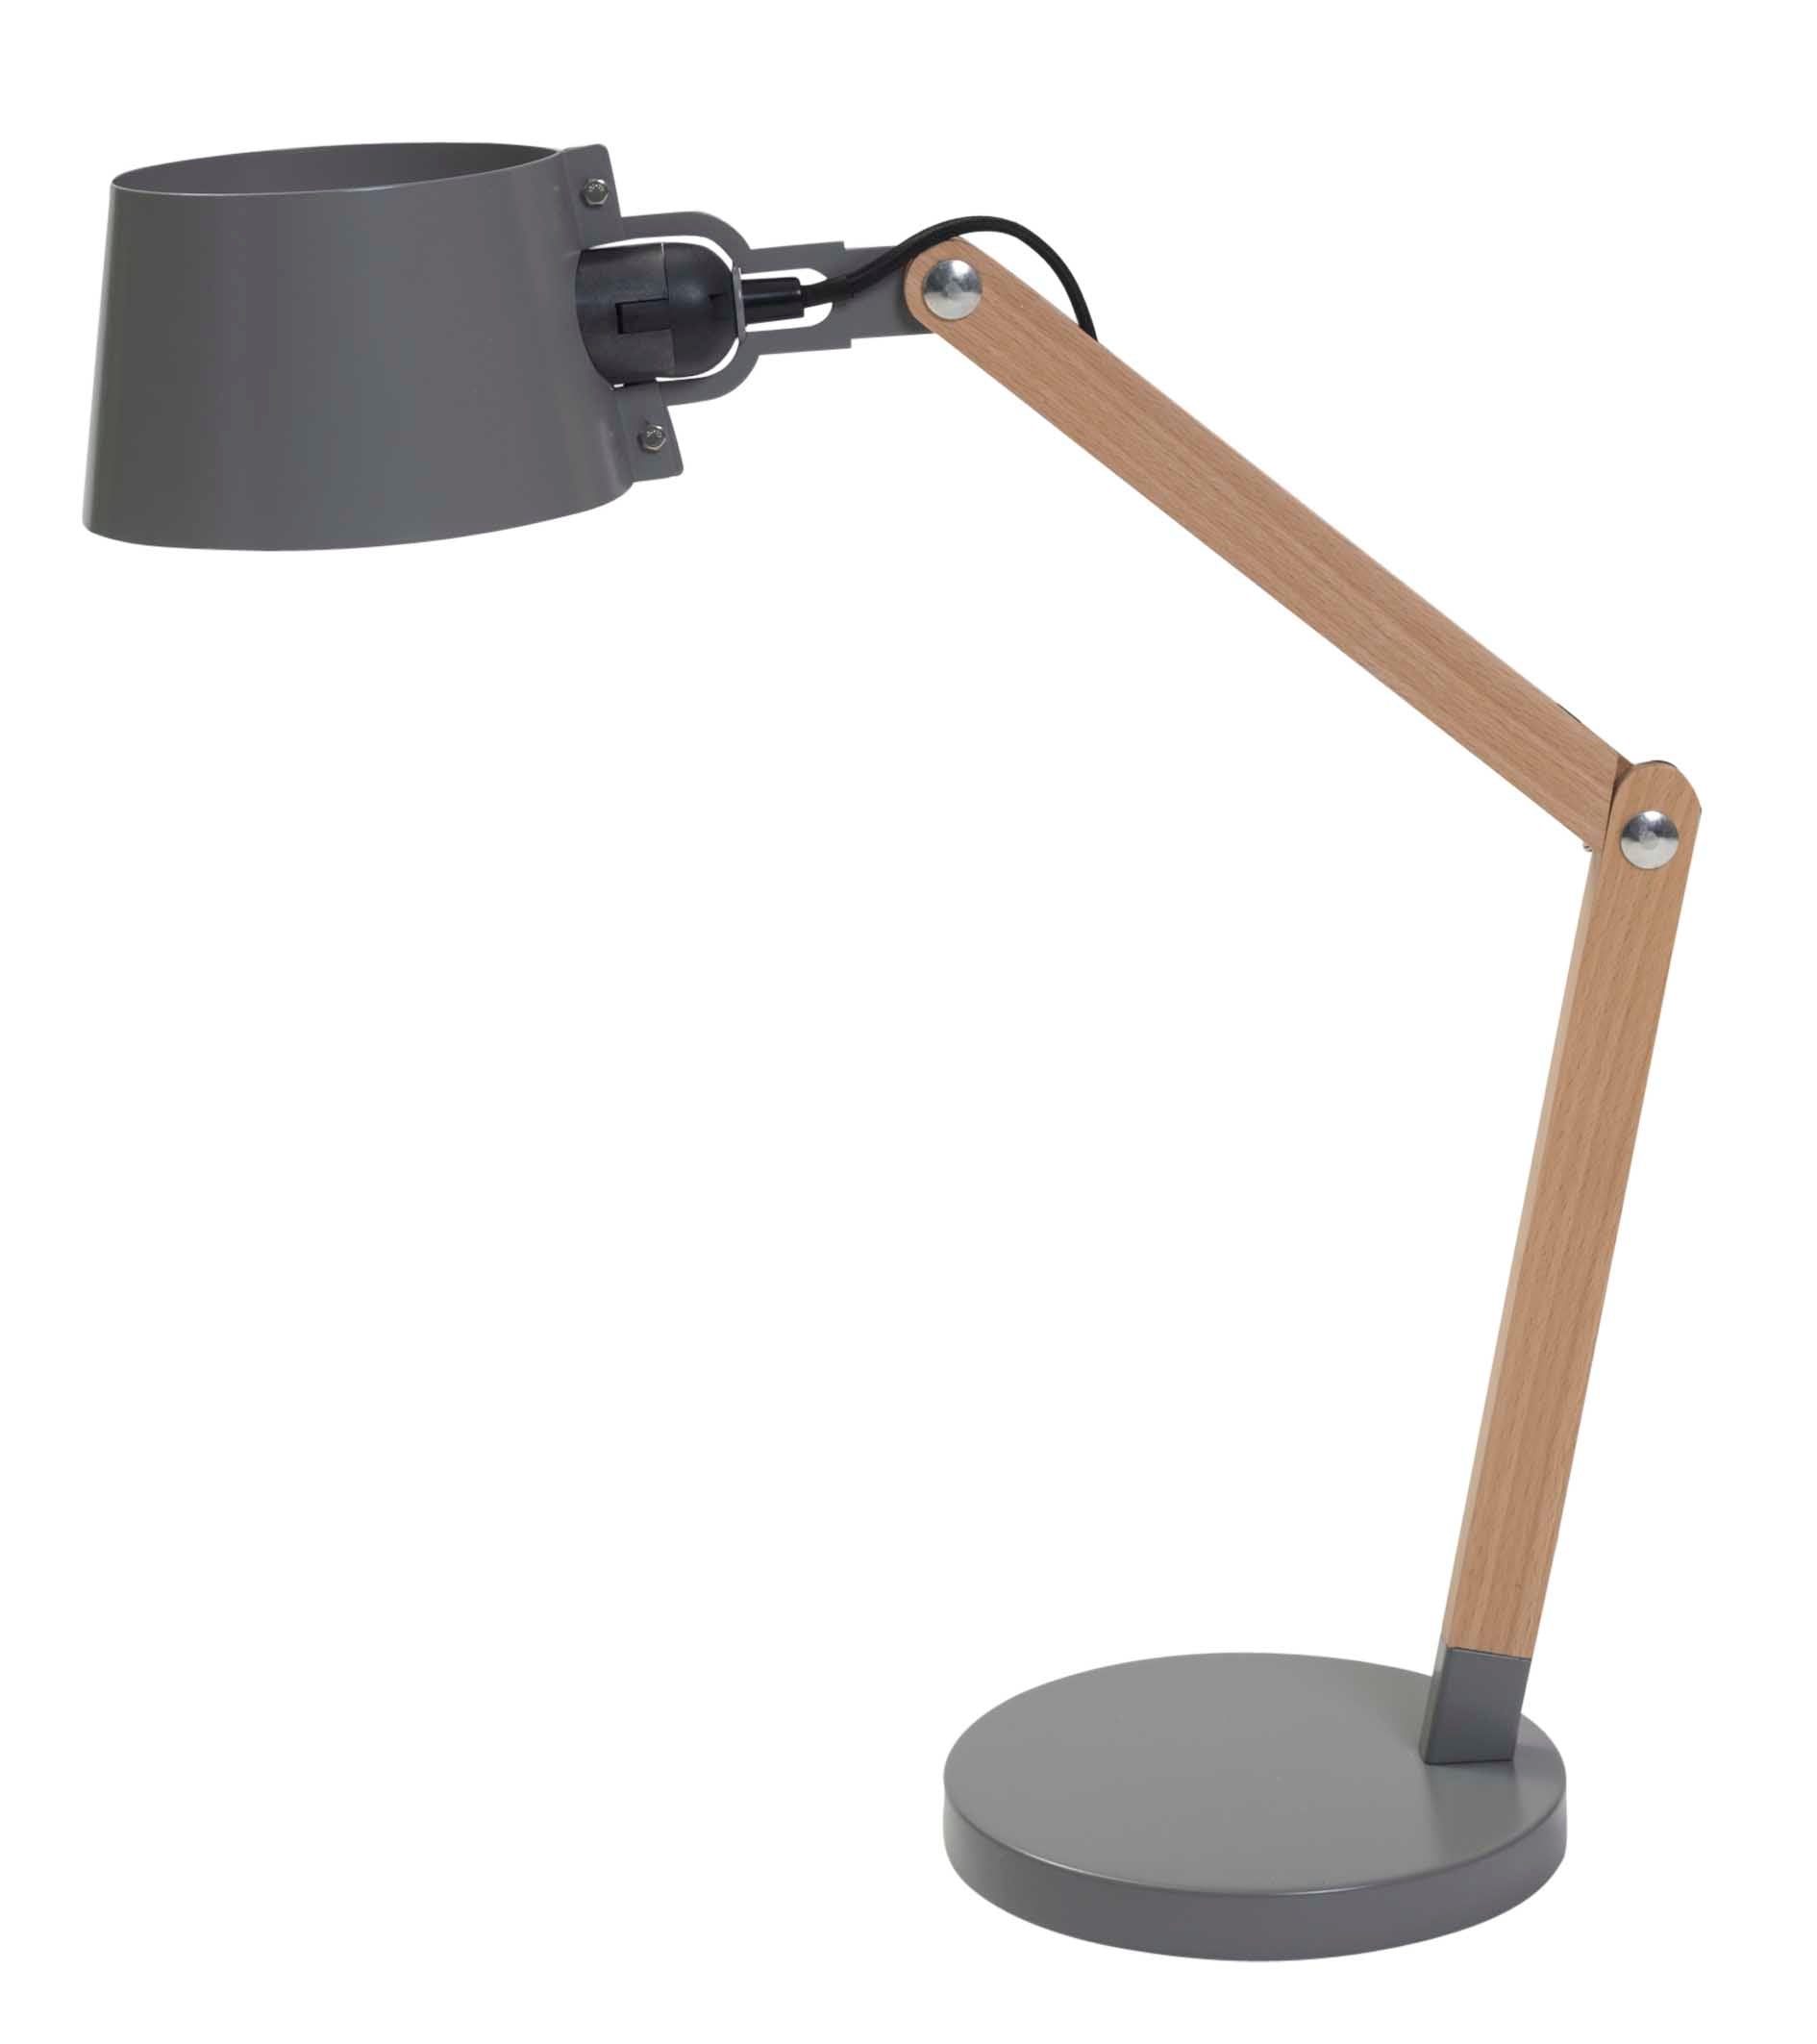 Mid Grey Table Lamp - The Nancy Smillie Shop - Art, Jewellery & Designer Gifts Glasgow